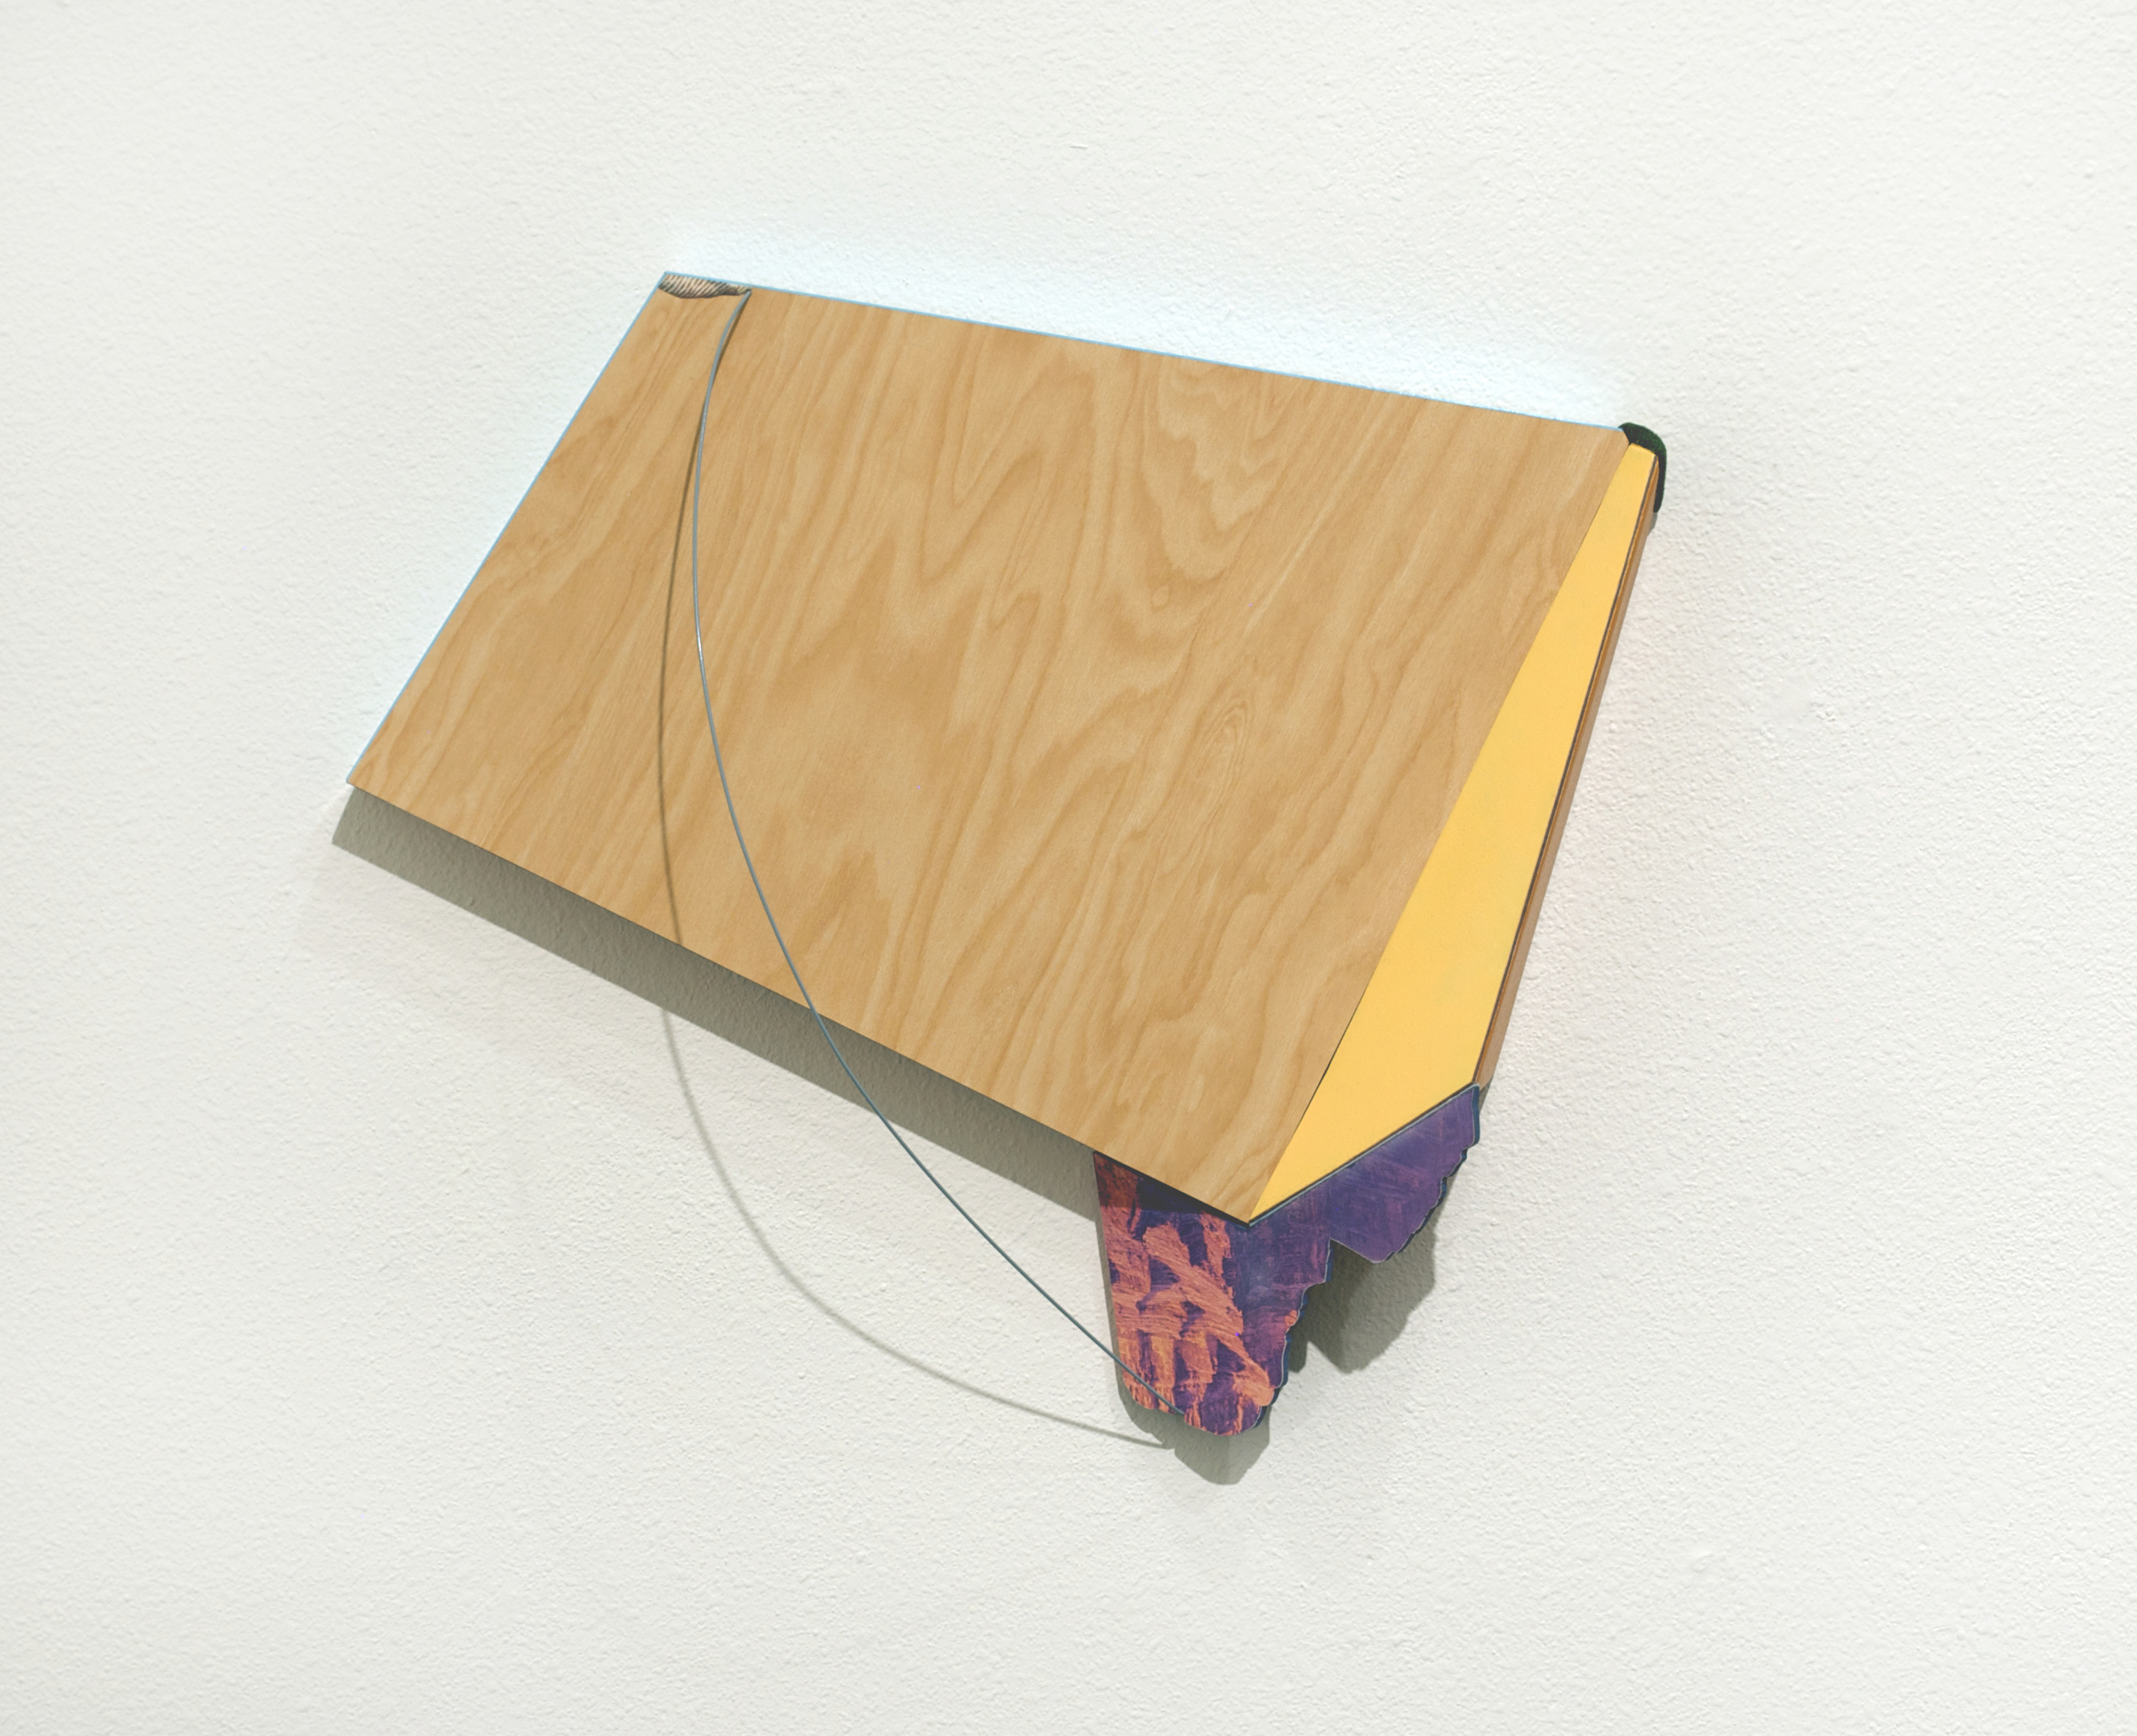   She had an elegance, but something seemed a tad fake,  2012  formica, wood, wire, paint, and cut paper.&nbsp;19 x 22 x 6 inches 